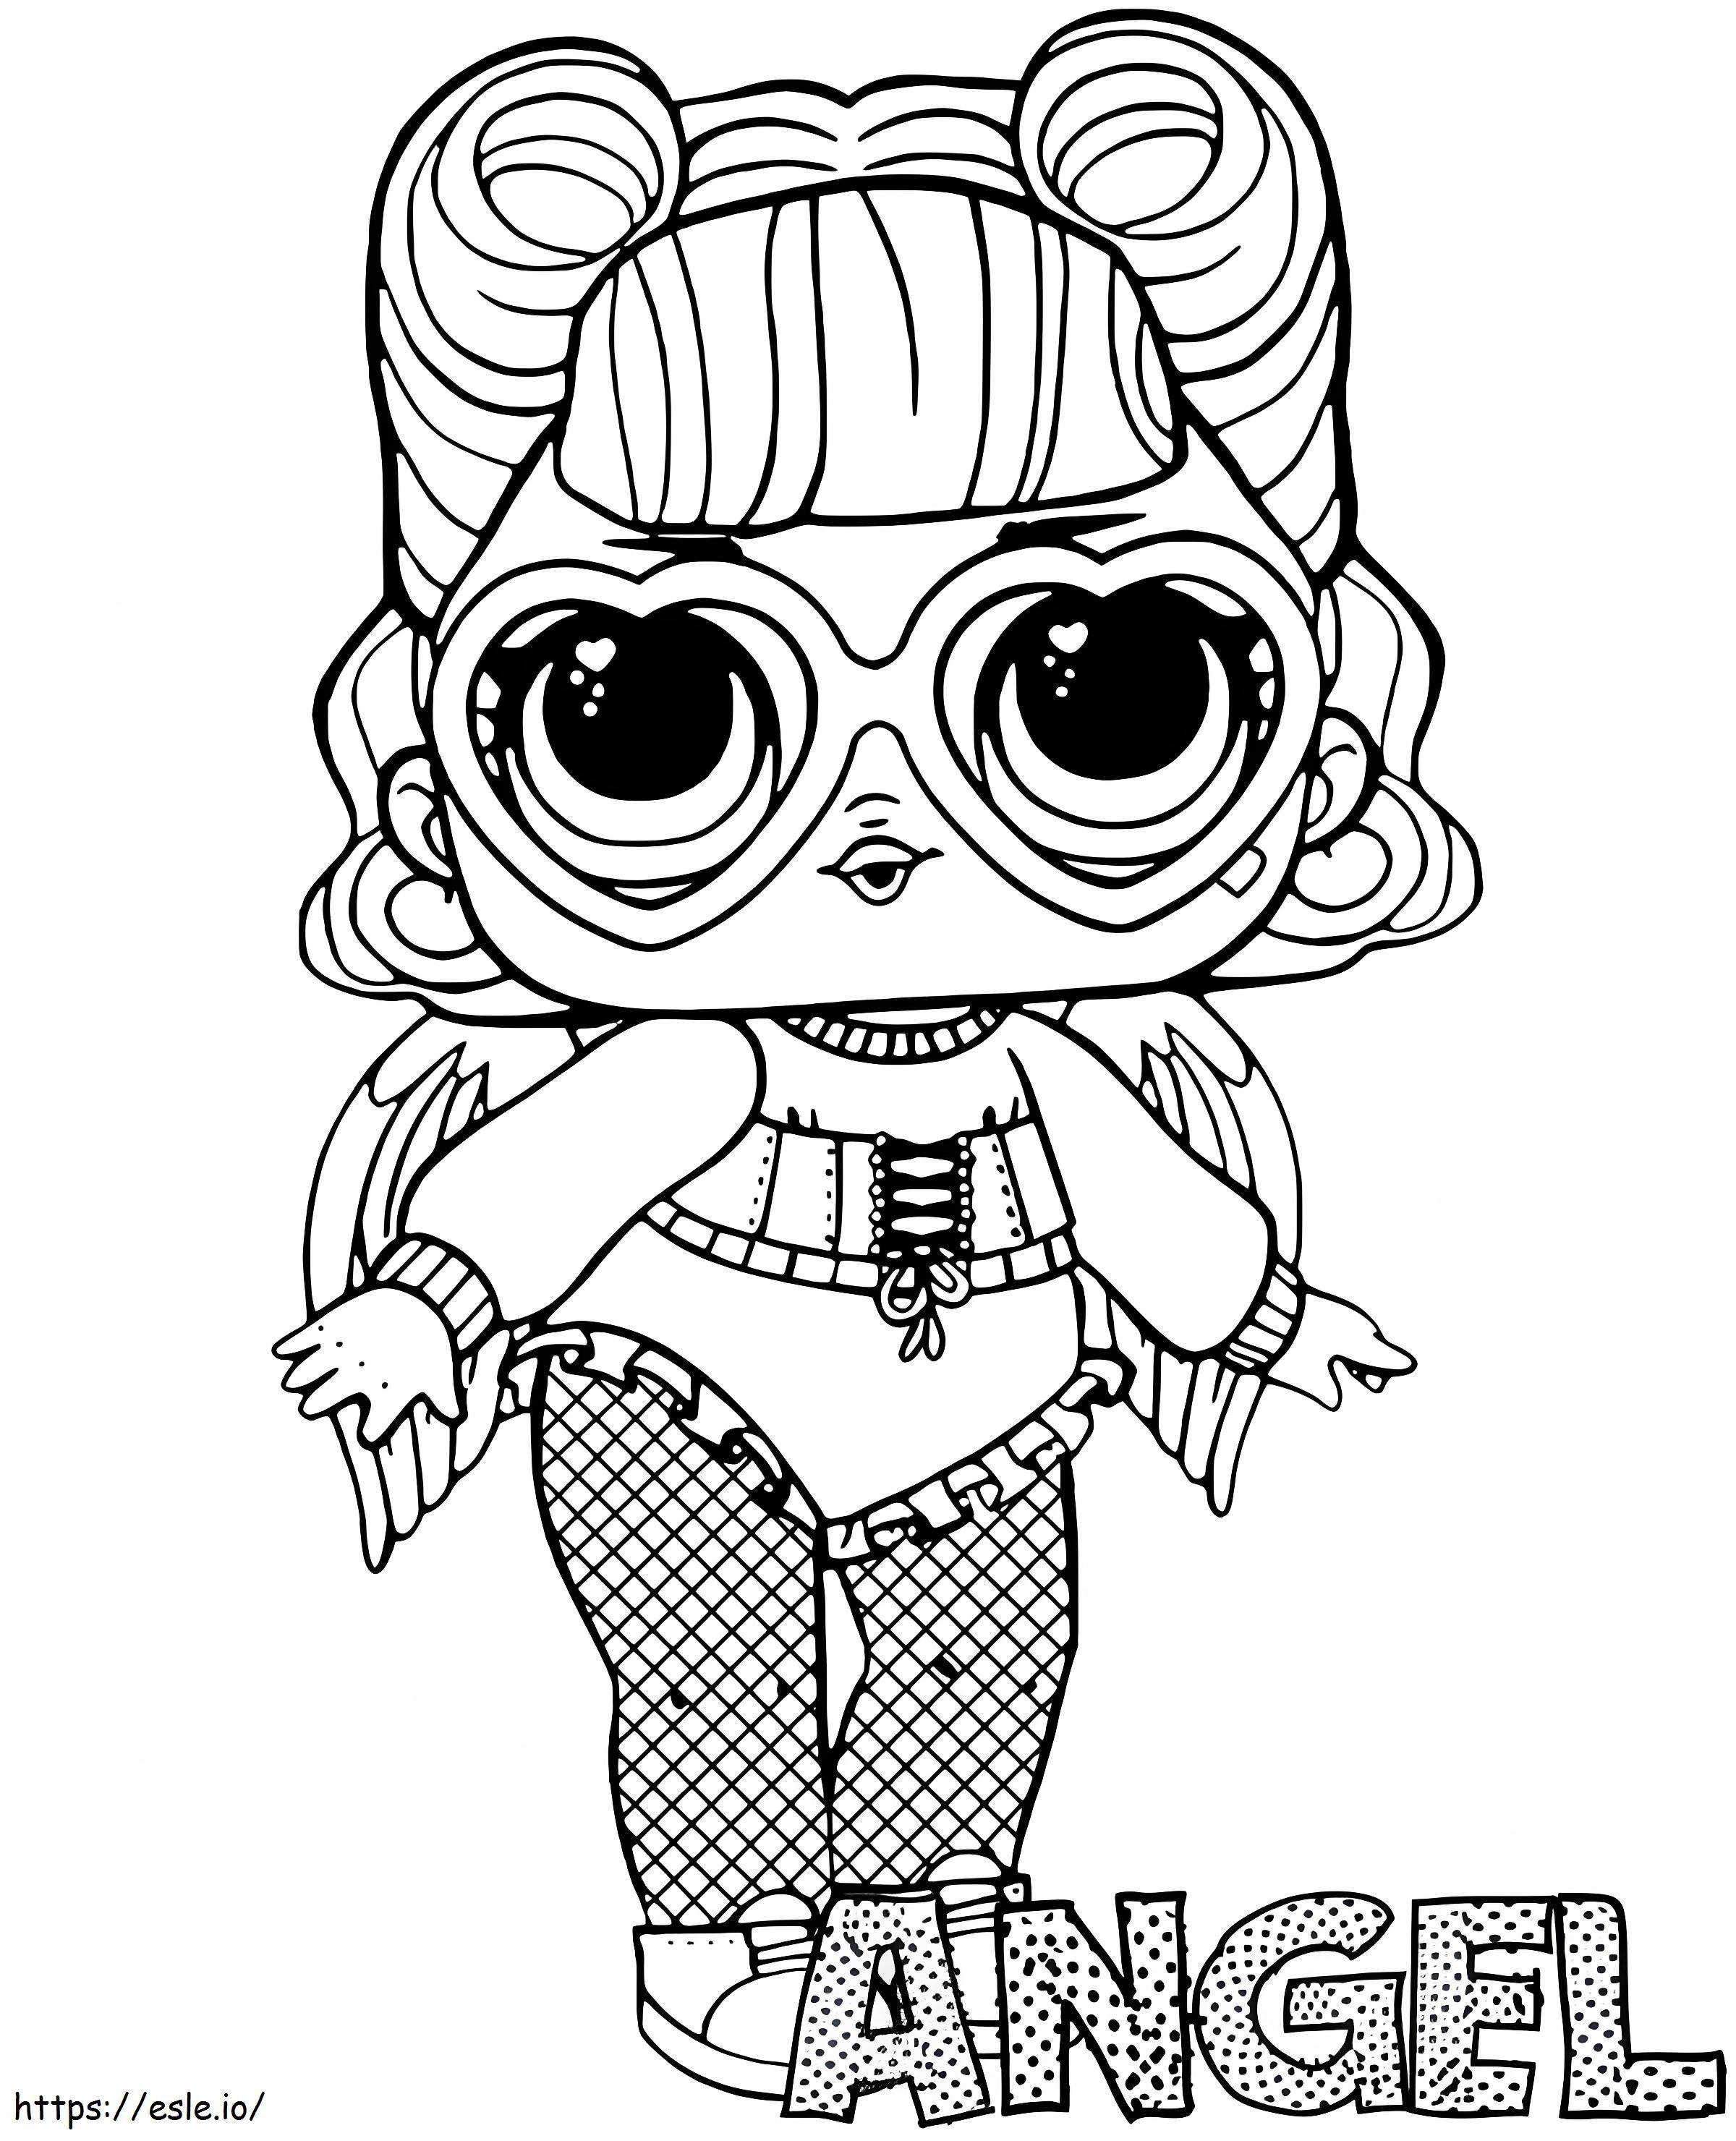 1572569517 Angel Doll Lol Surprise coloring page